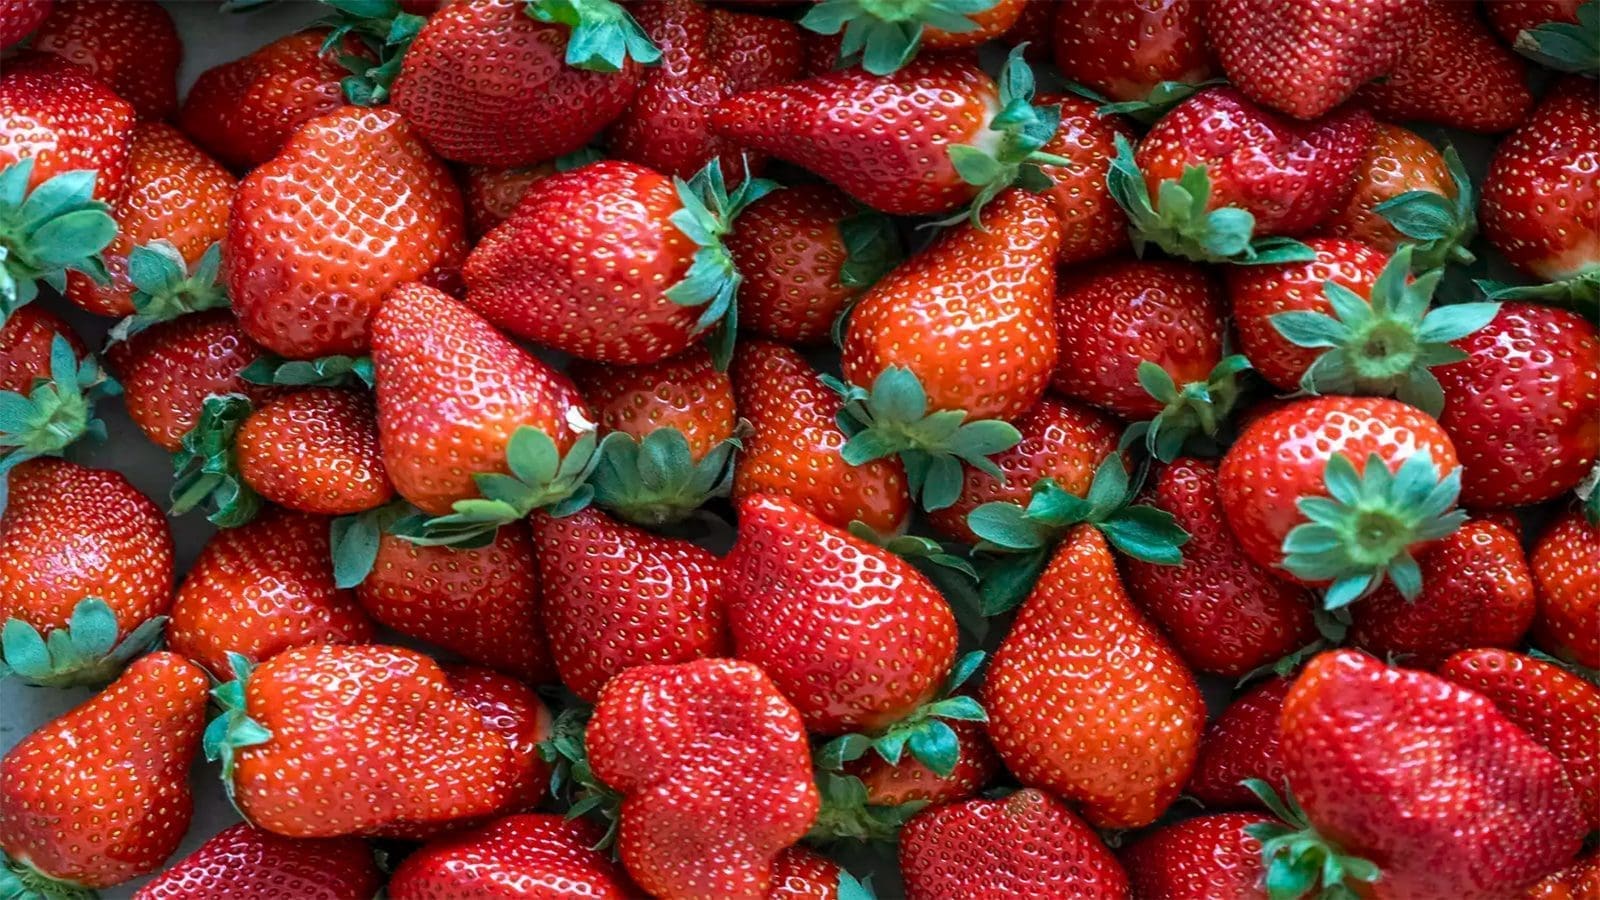 Fresh strawberries linked to Hepatitis A infections, Jif peanut butter recalled